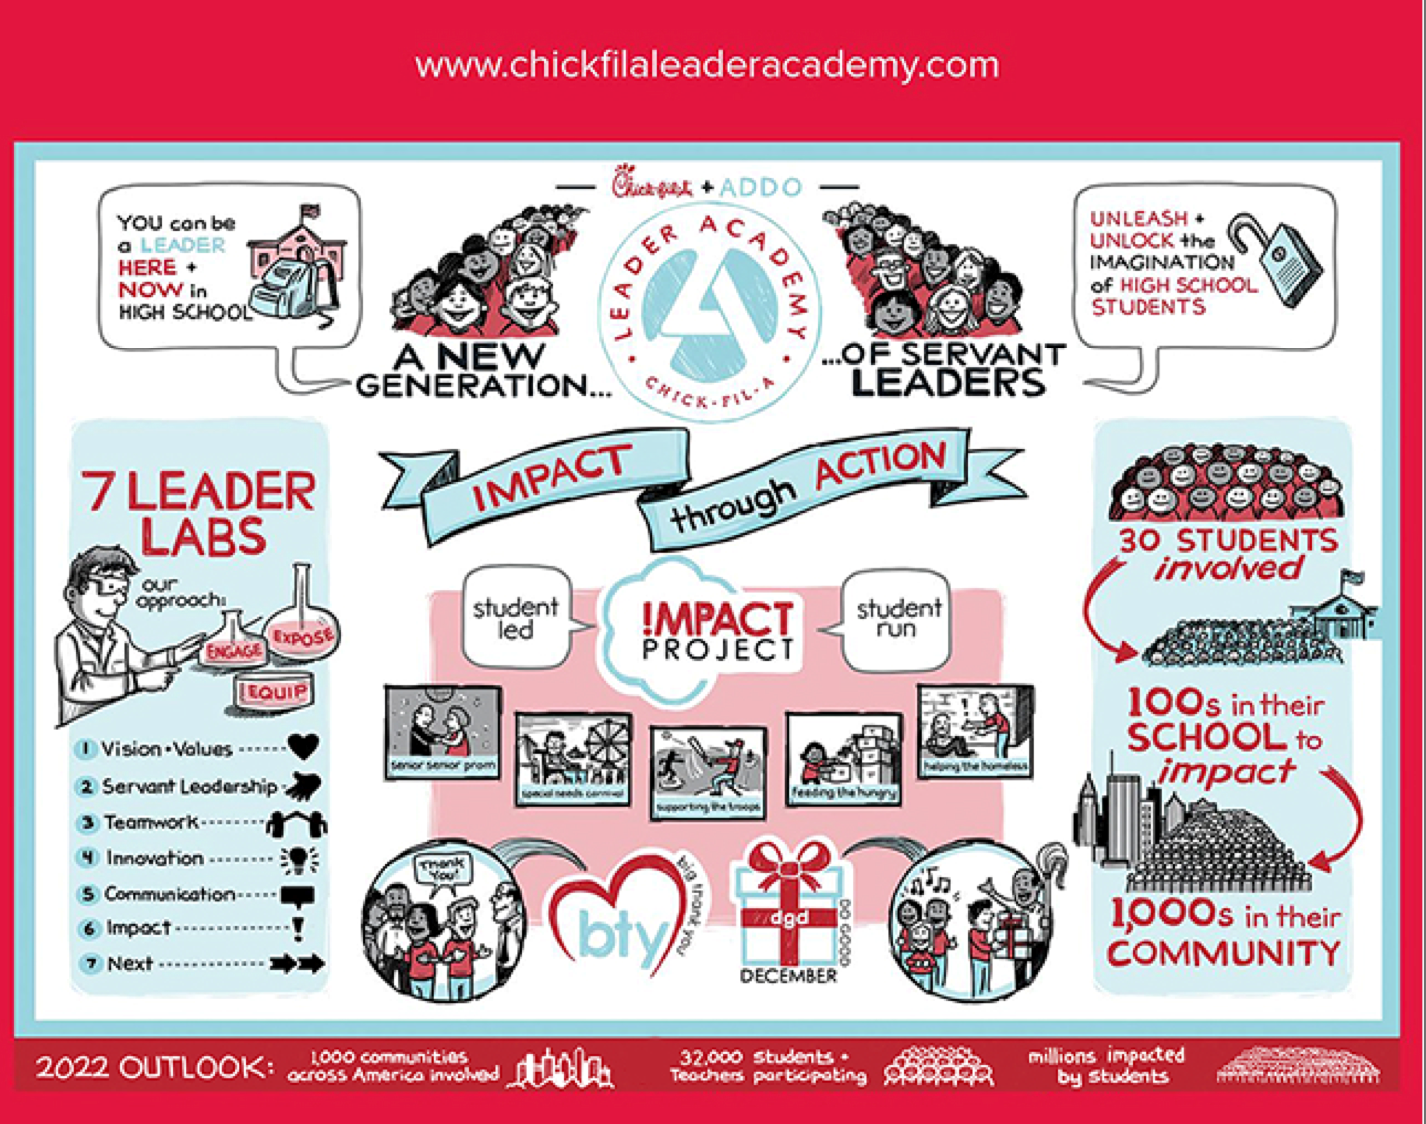 Chick-fil-A Leader Academy